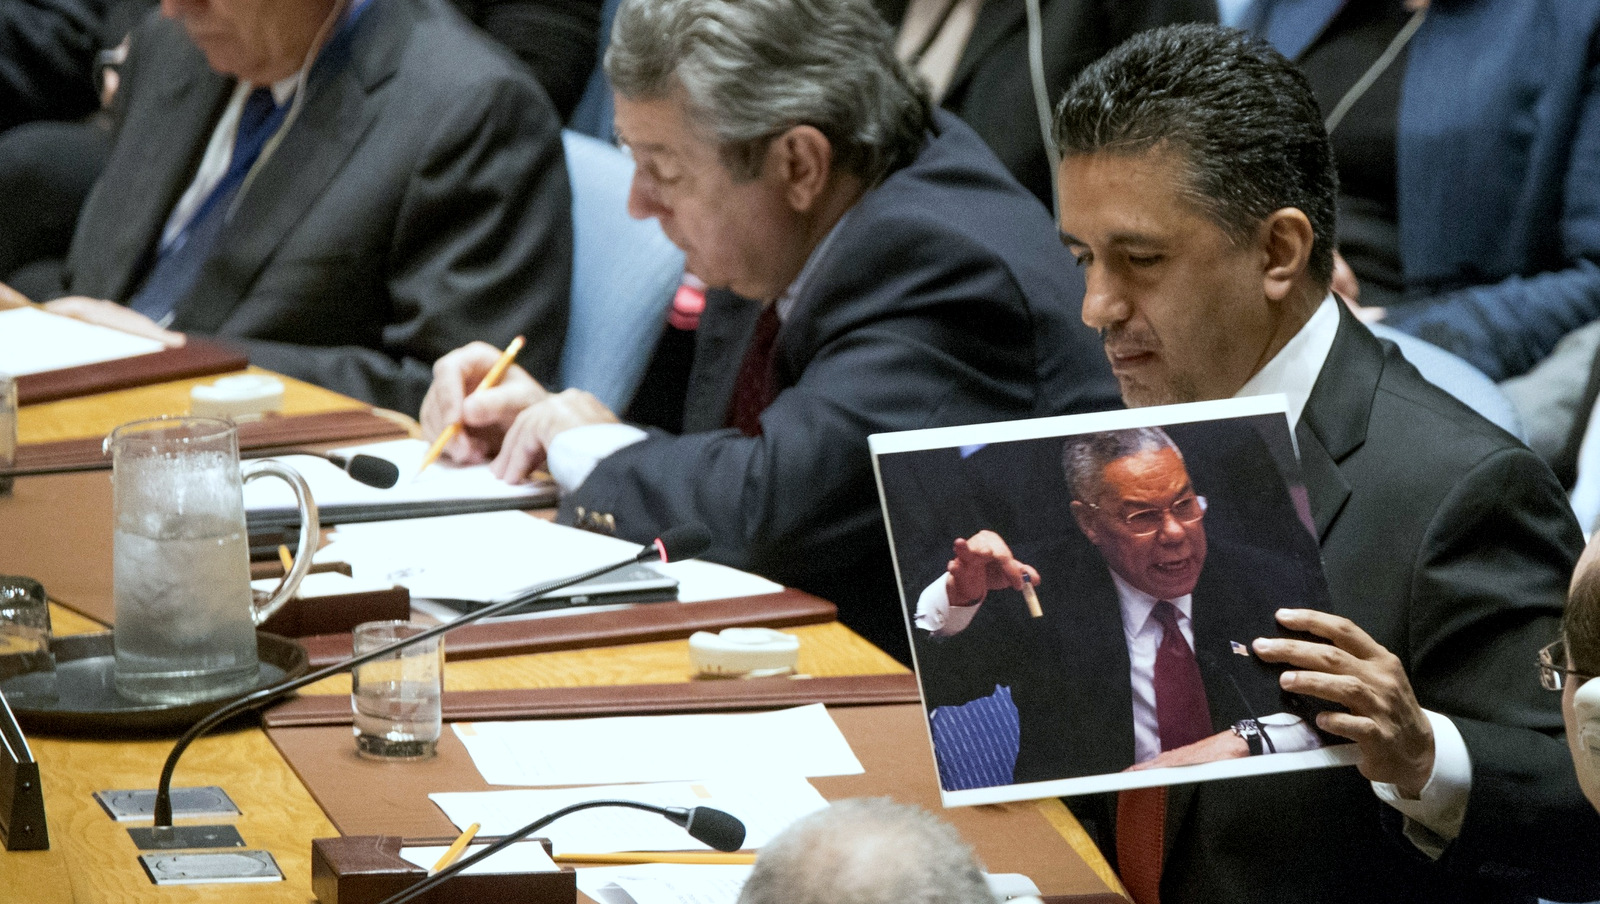 Bolivian Ambassador to the United Nations Sacha Sergio Llorenti Soliz holds a photo of former U.S. Secretary of State Colin Powell holding up a vial that he described as one that could contain anthrax, during a Security Council meeting on the situation in Syria, Friday, April 7, 2017 at United Nations headquarters. (AP Photo/Mary Altaffer)